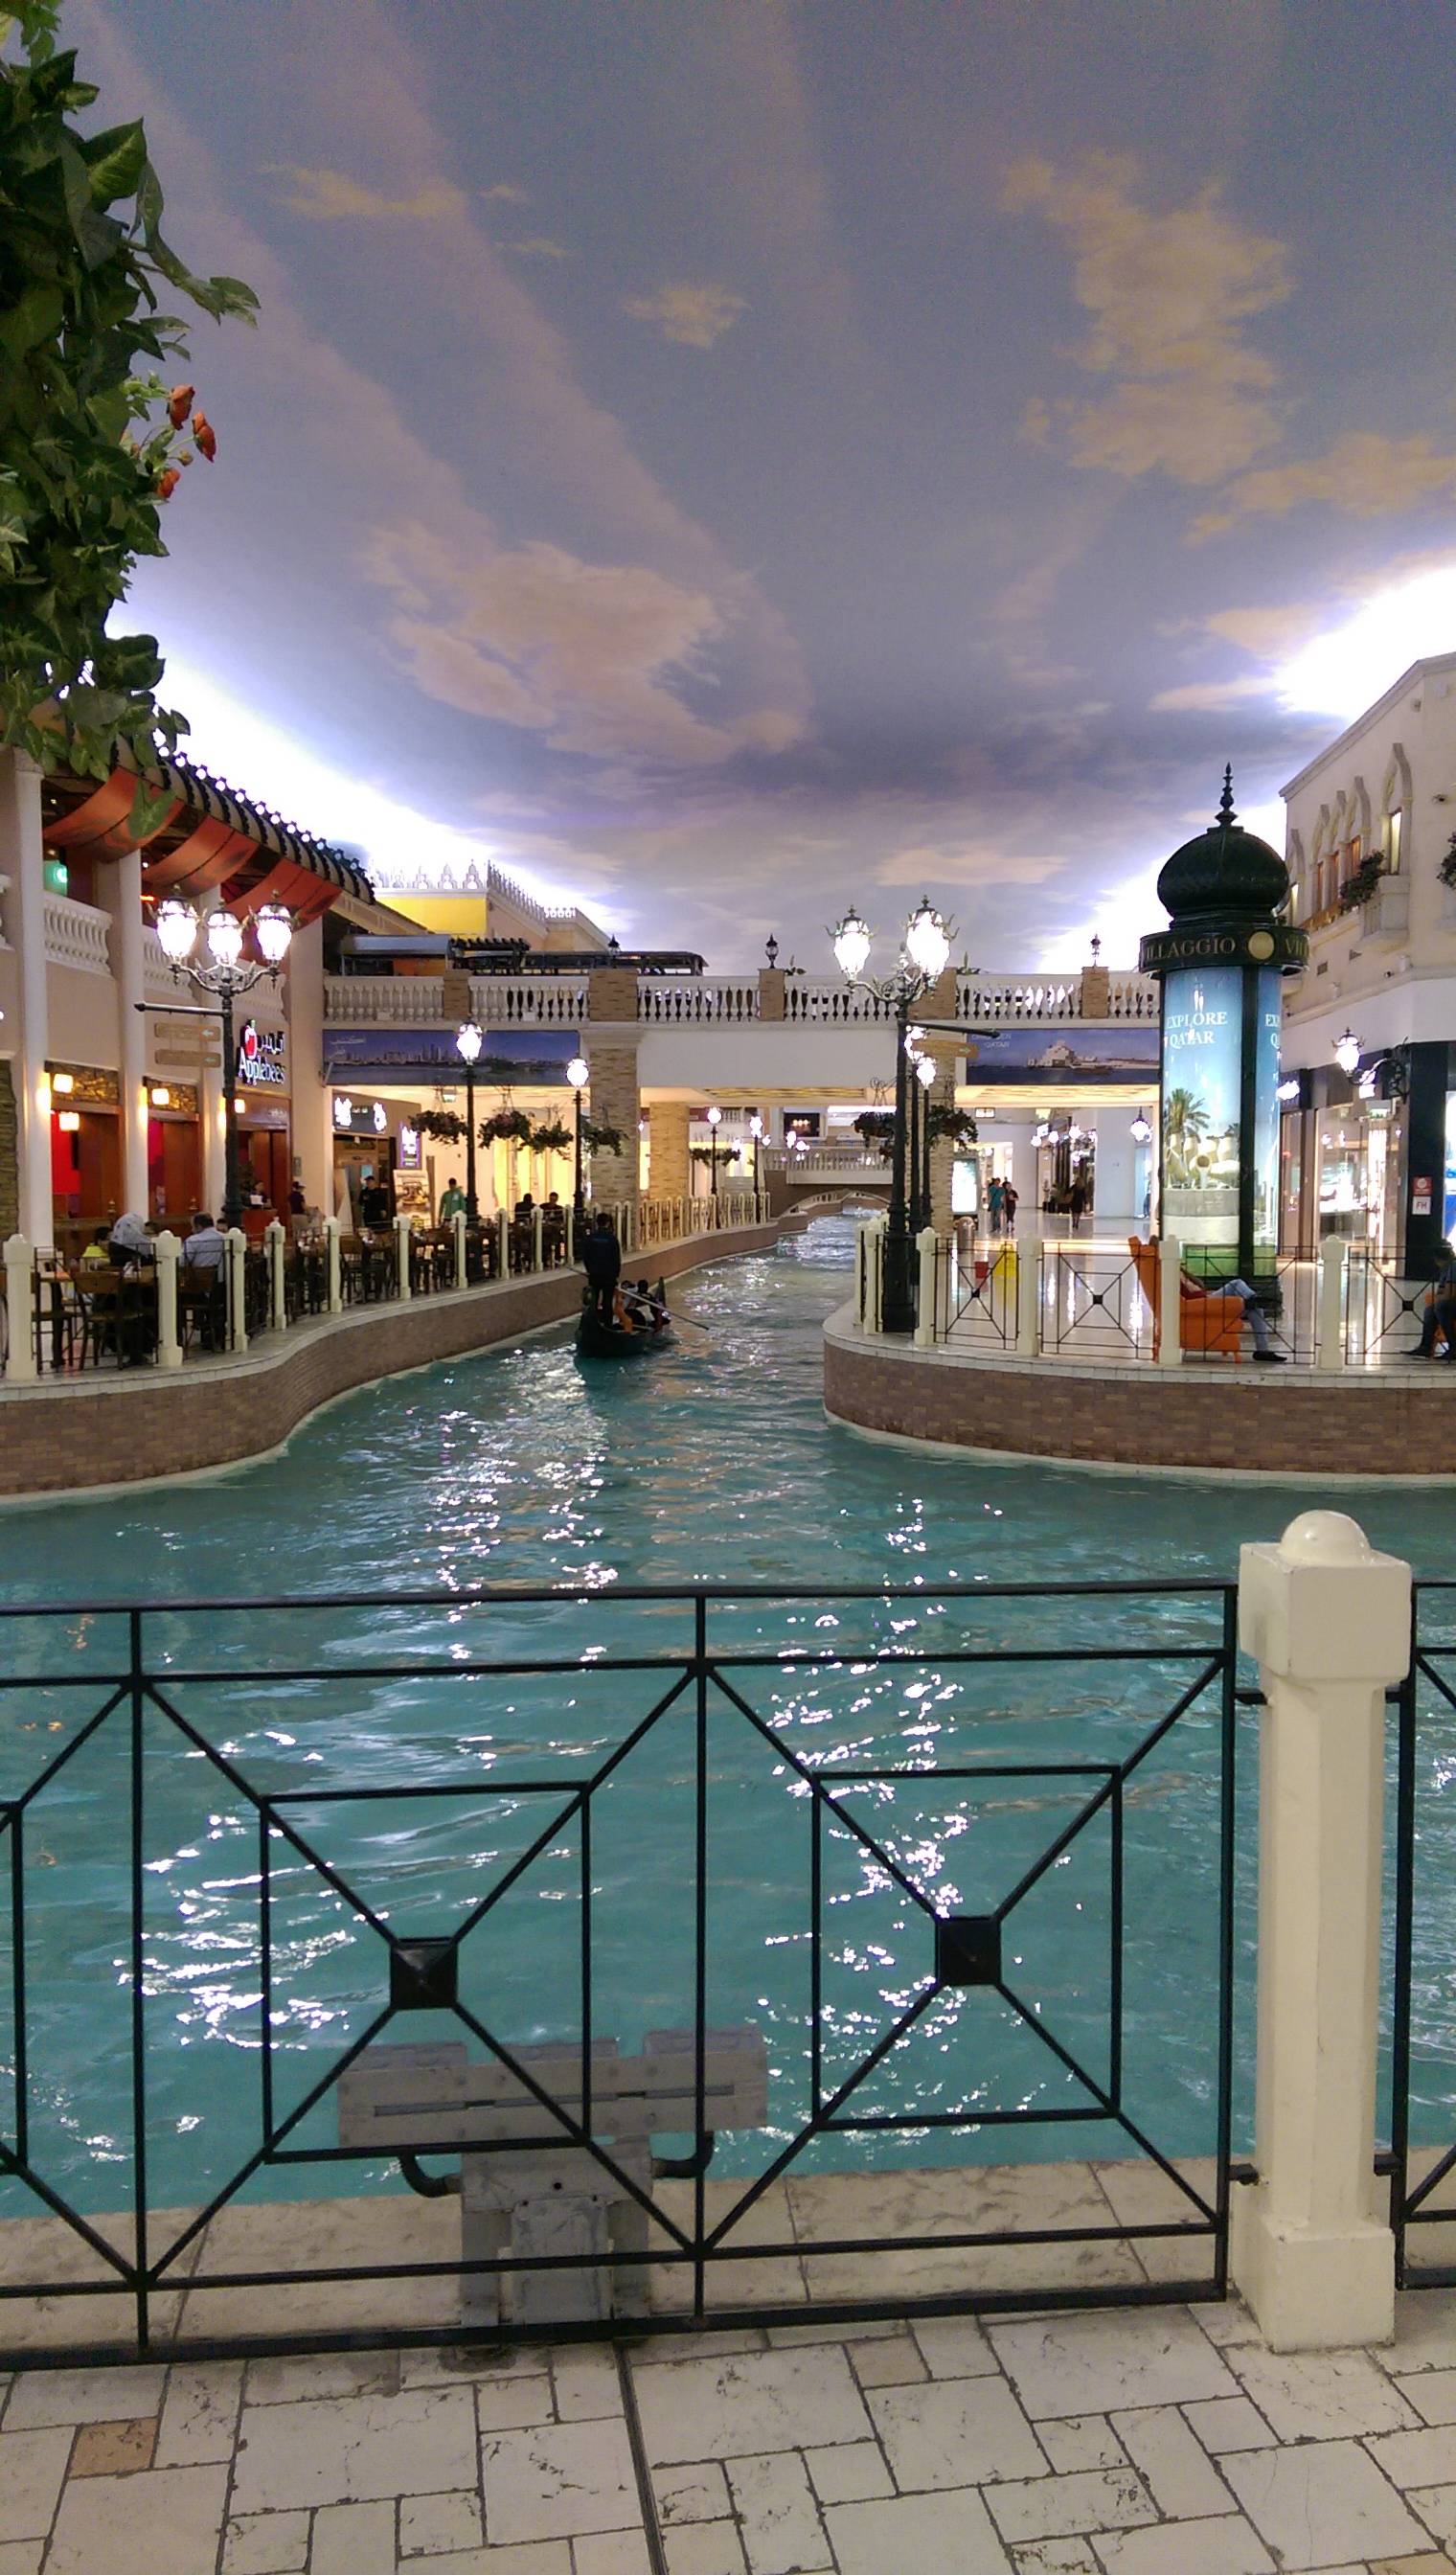 This mall has a river in the middle of it and the ceiling is painted like the 

sky.